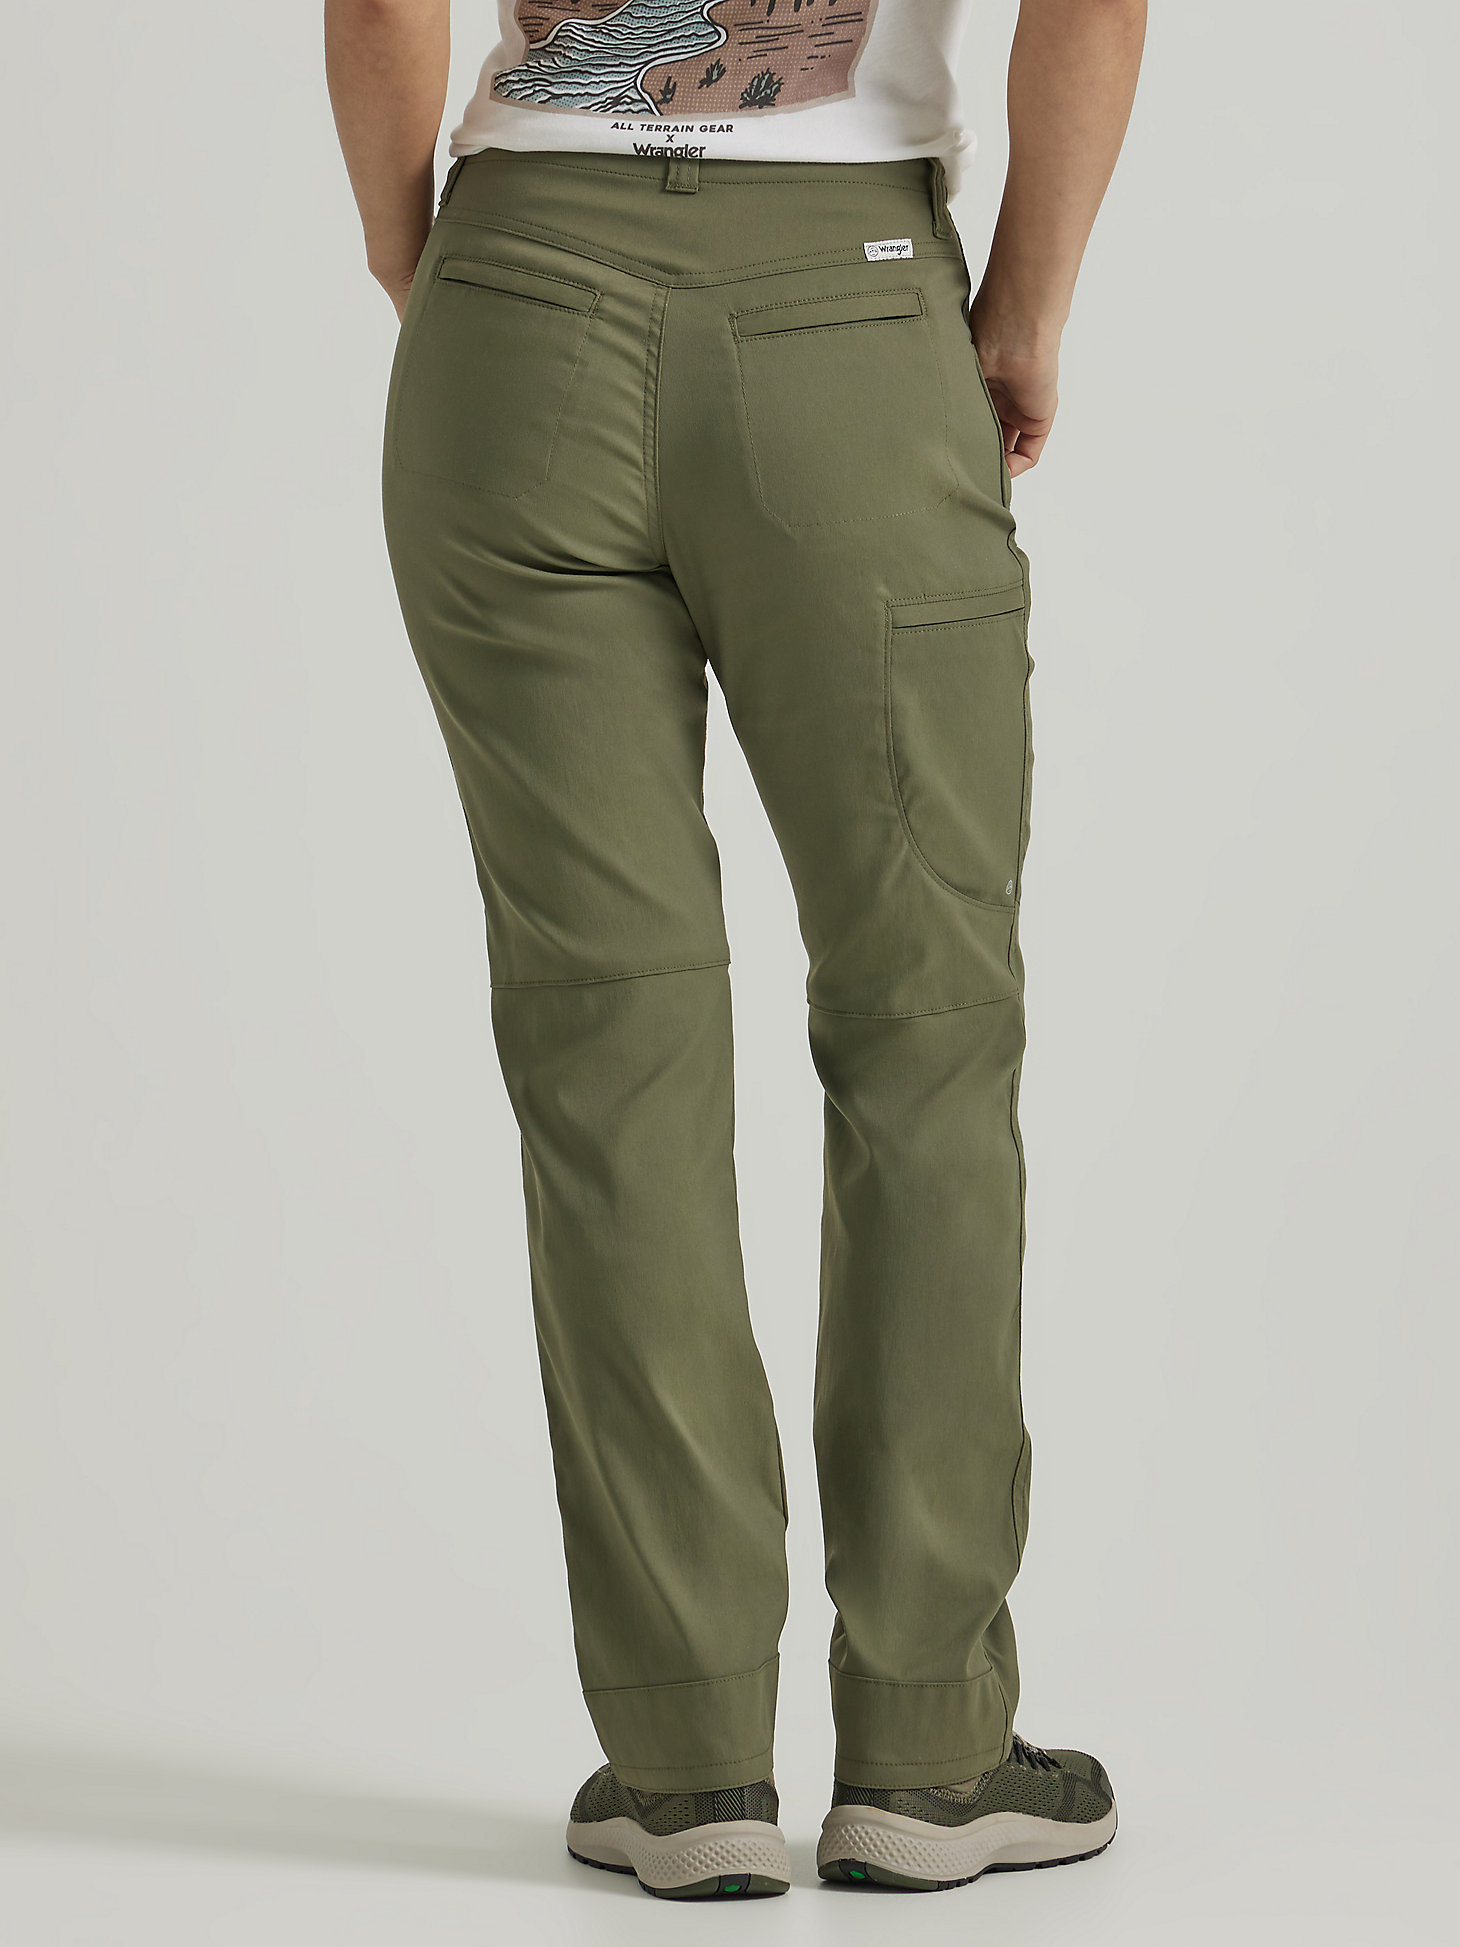 ATG by Wrangler™ Women's Slim Utility Pant in Dusty Olive alternative view 1